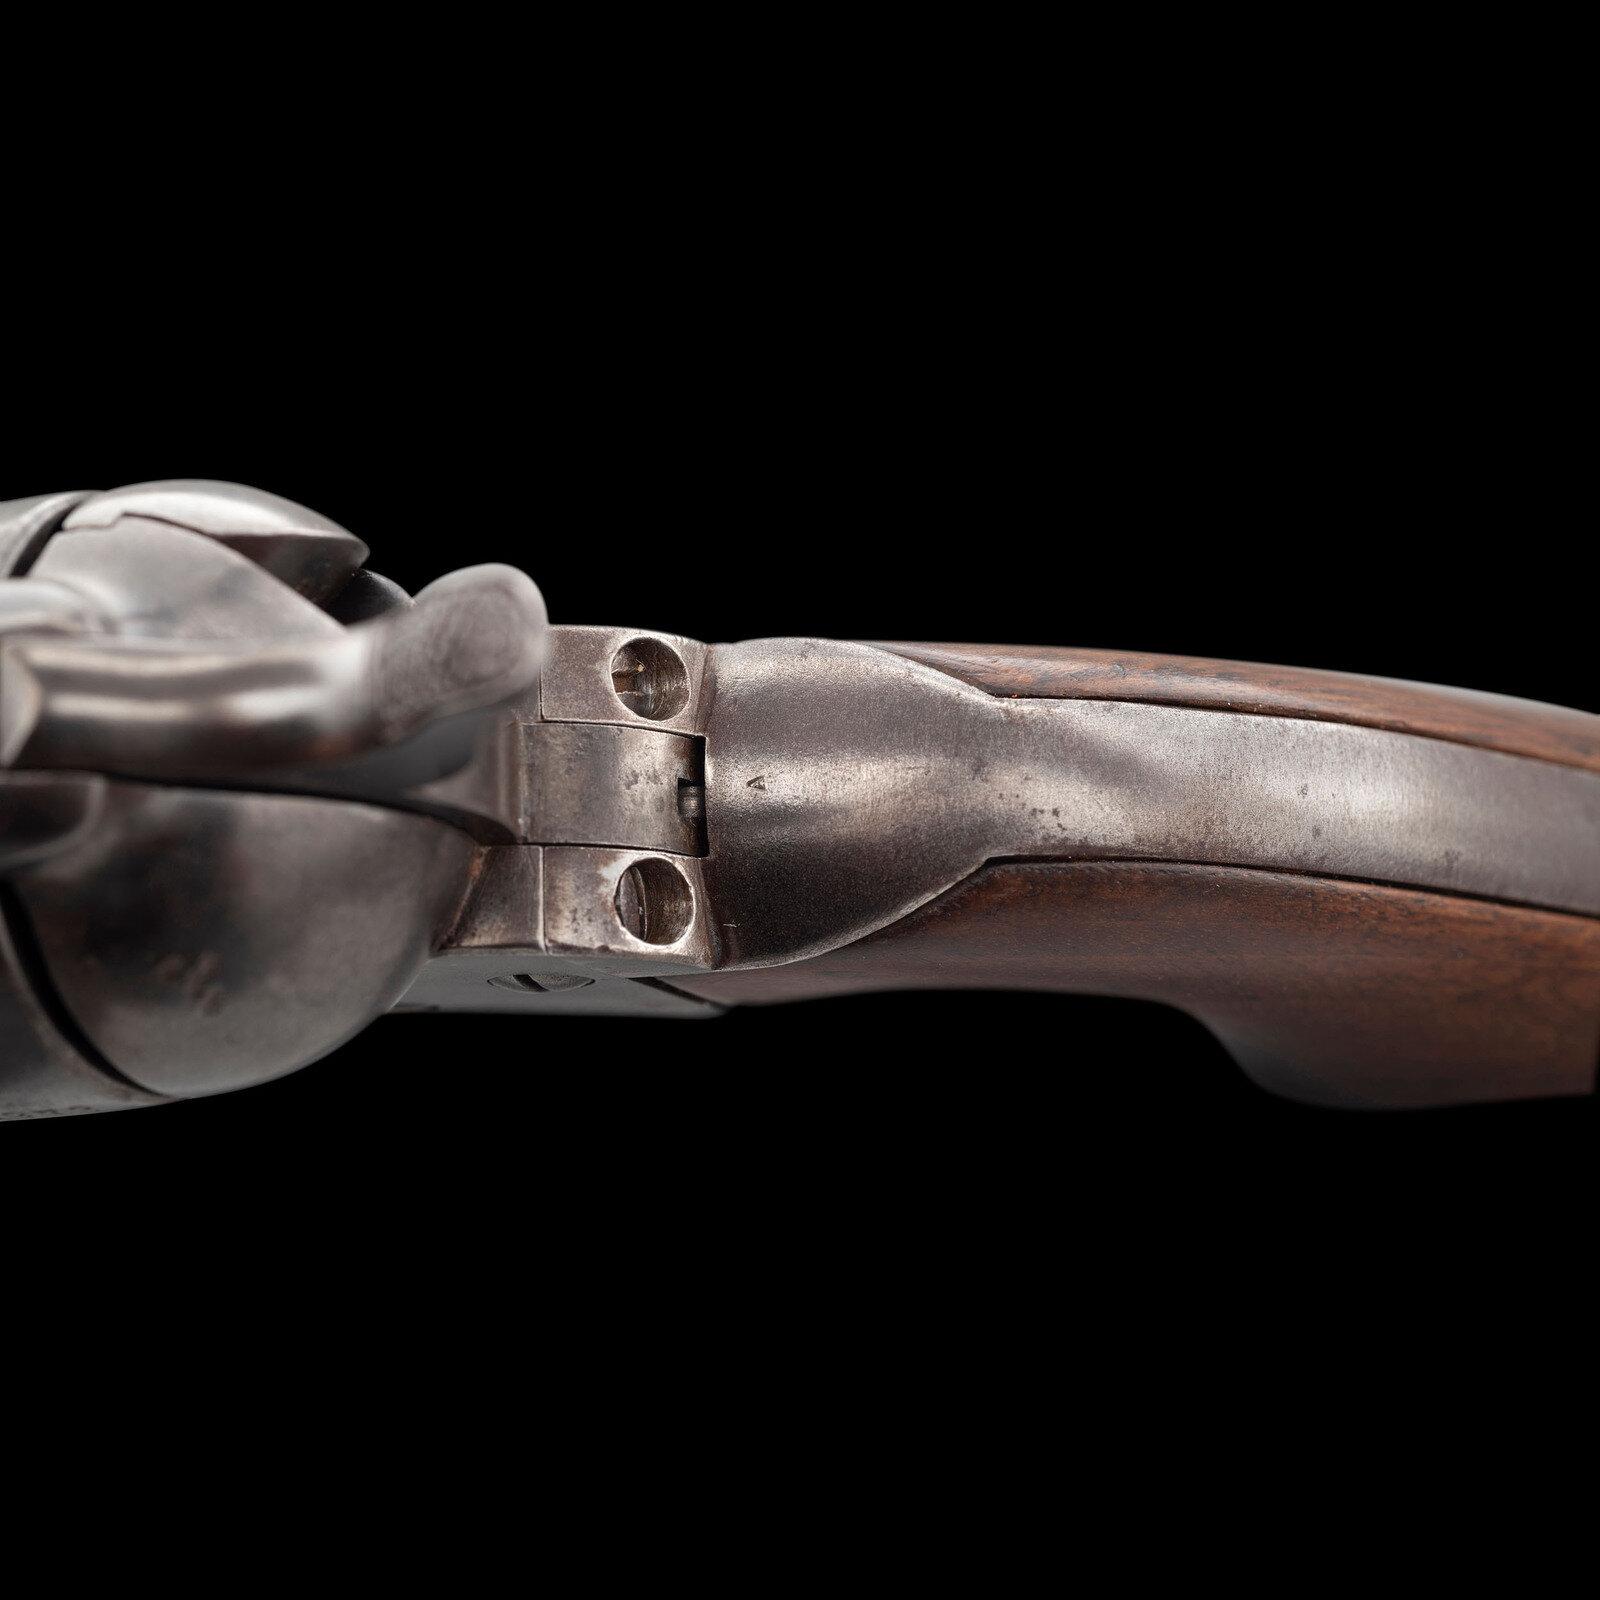 Custer Range Colt SAA Cav Revolver #5973 - A Lot 6 Delivery - Likely Picked Up at The Little Bighorn